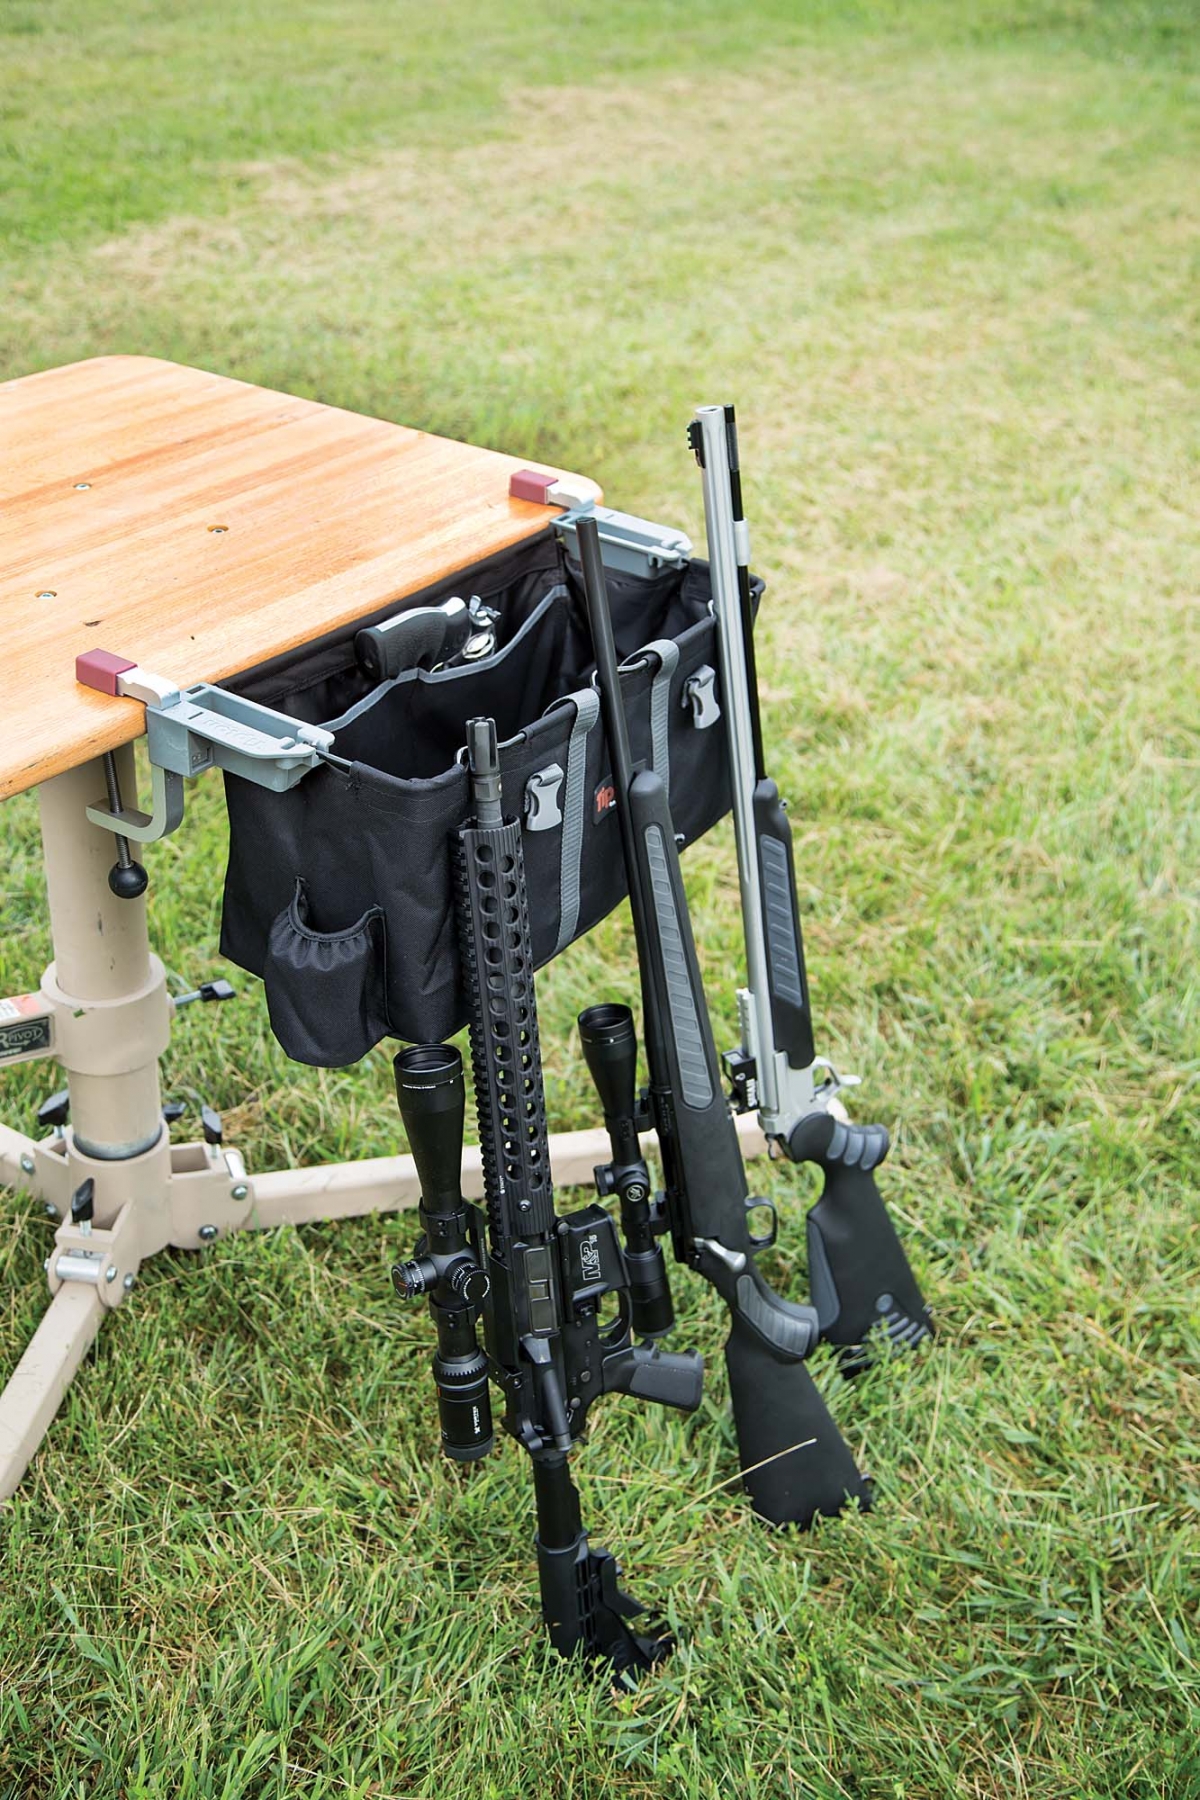 The Tipton Transporter Range Vise, from Battenfeld Technologies, is the perfect addition to your next trip to the range